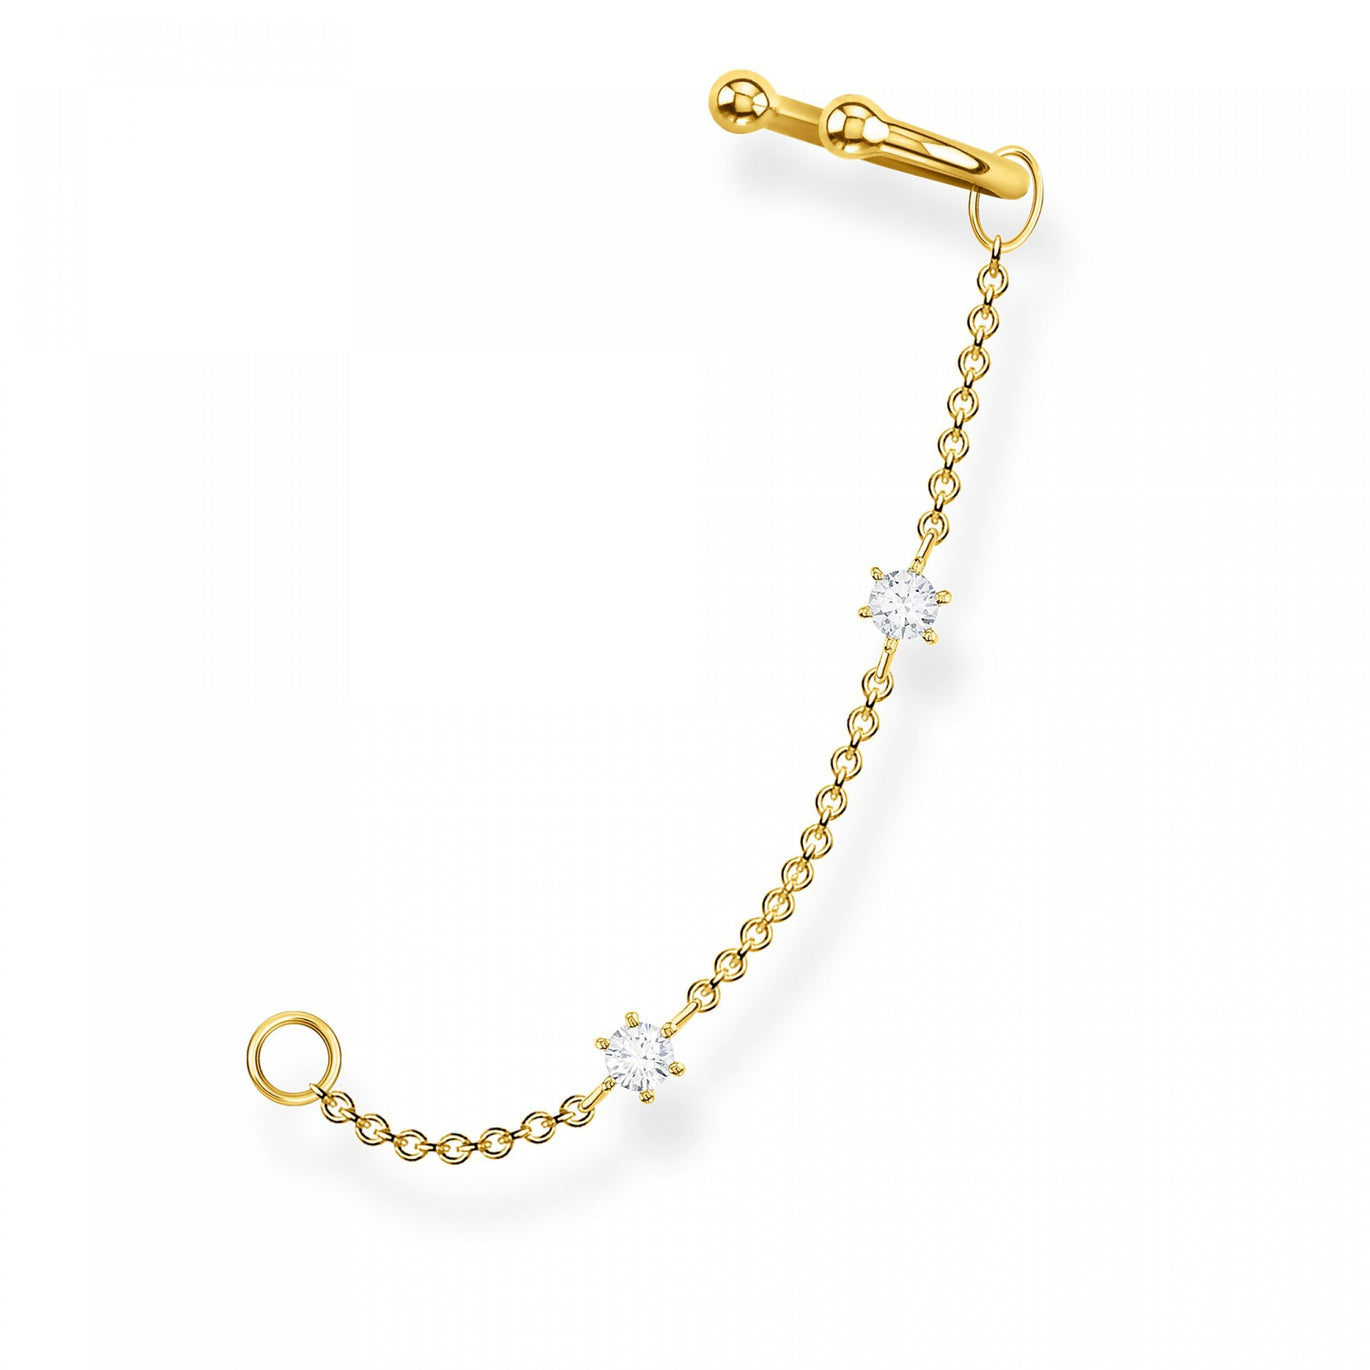 Thomas Sabo Single Ear Cuff White Stones with Anchor Chain Yellow Gold